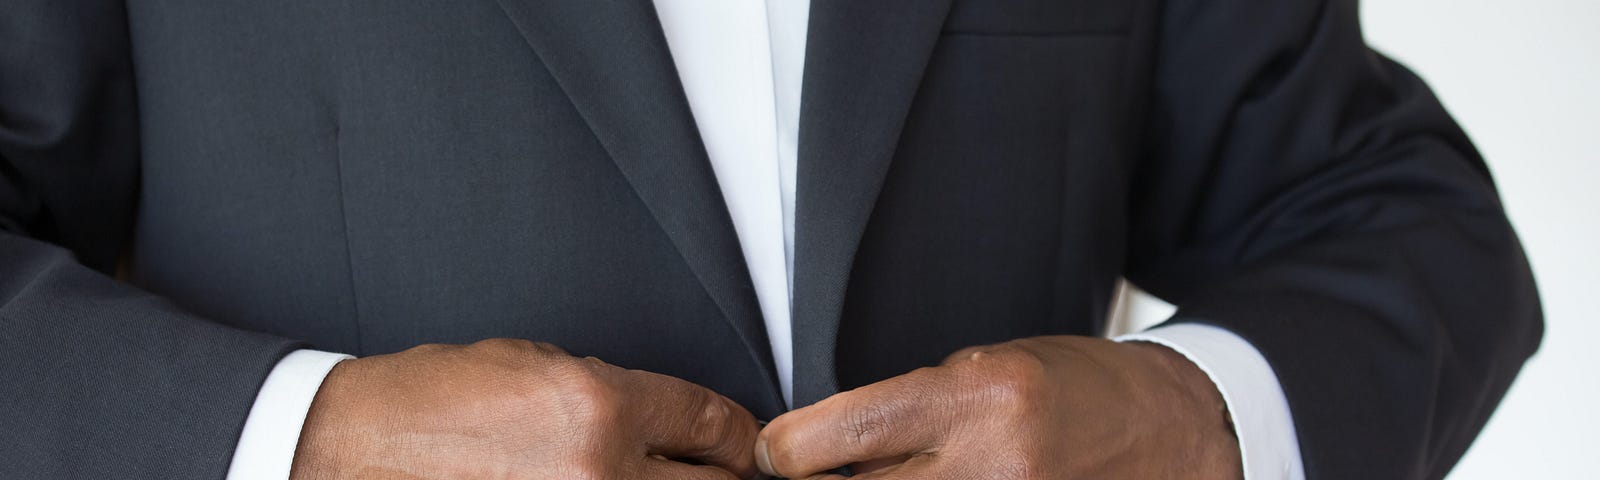 Man in a tuxedo, buttoning up his suit.